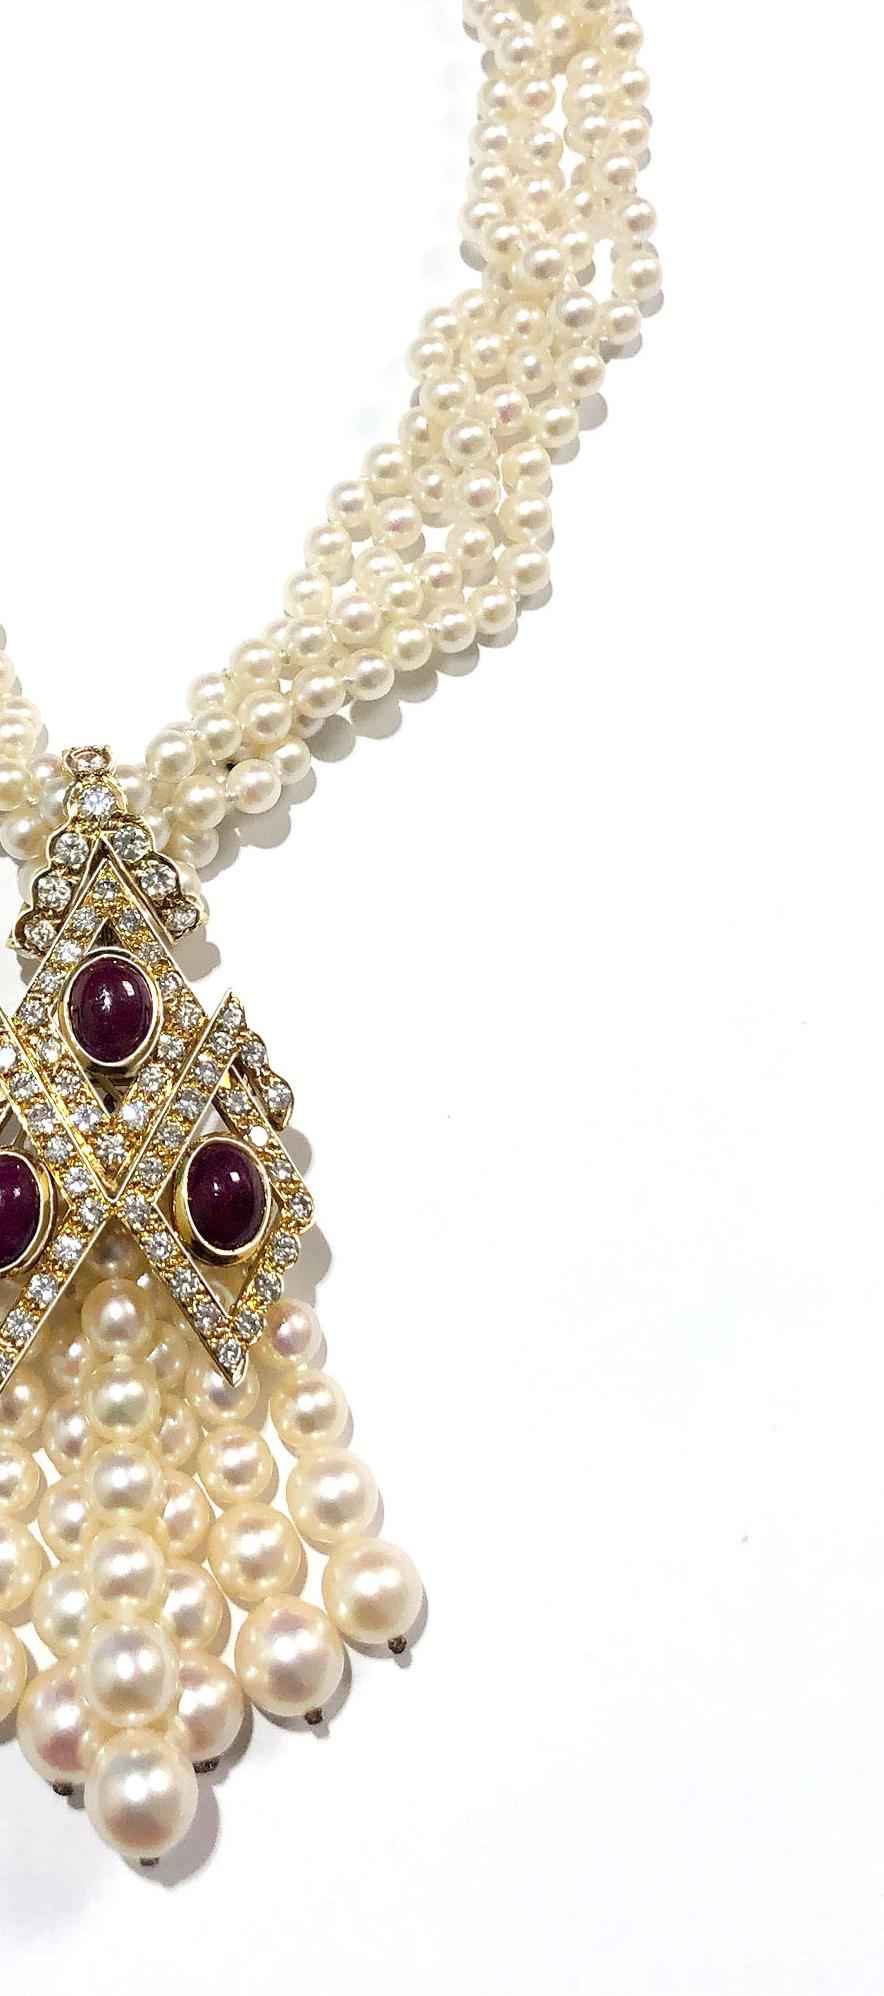 18 kt., composed of four strands of pearls approximately 4.9 to 4.5 mm., suspending and completed by 4 oval cabochon rubies, within open diamond-shaped frames of 81 round diamonds approximately 4.00 cts., the pendant suspending seven fringes of